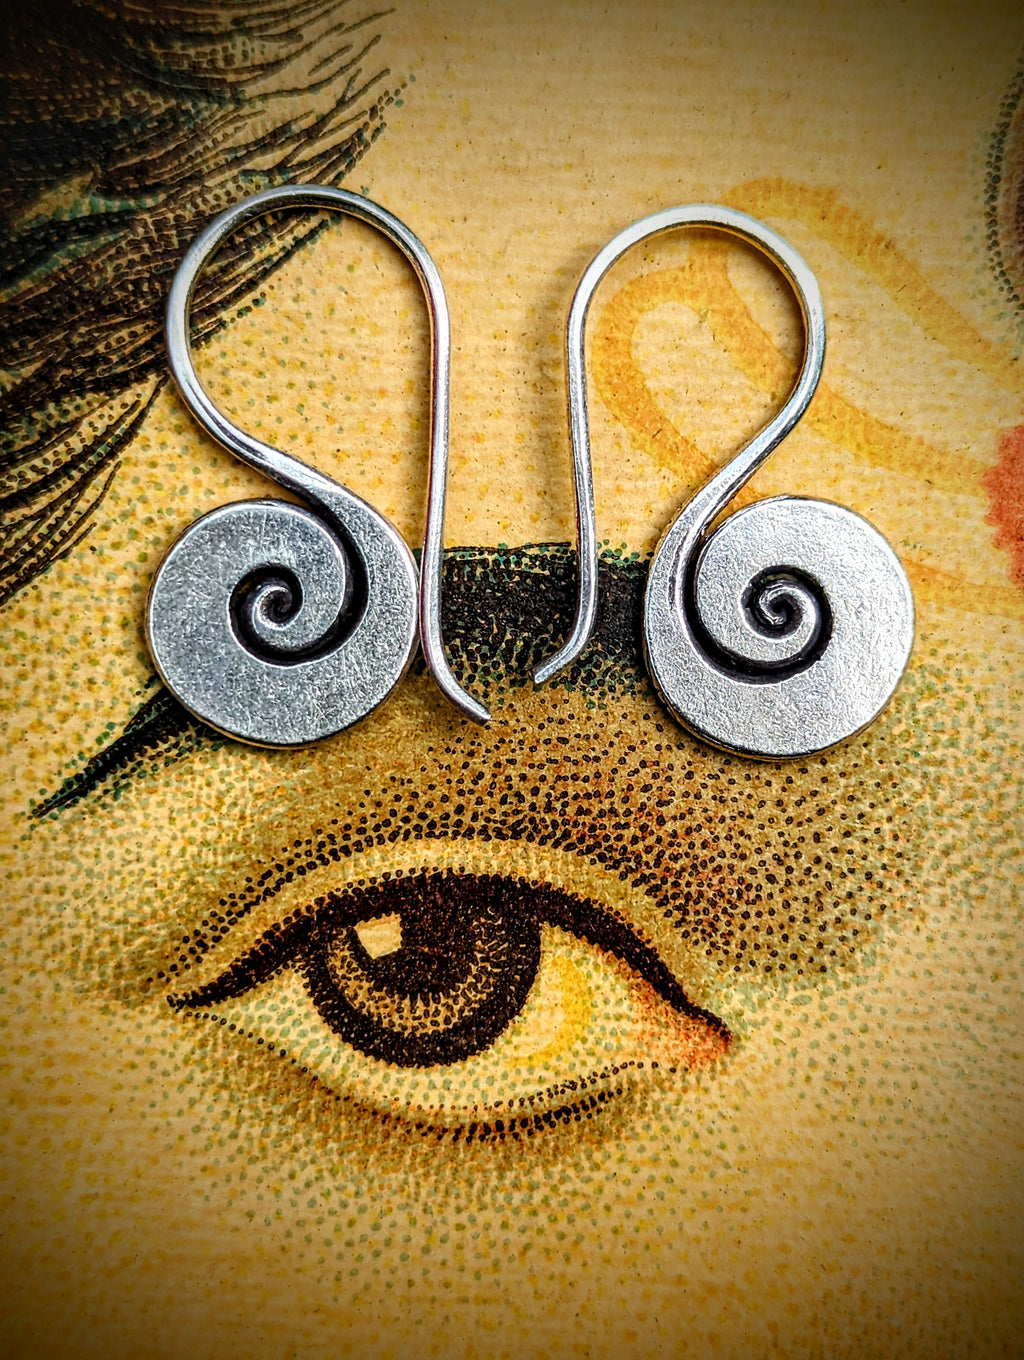 Handmade Burmese Karen earrings, beautiful matte, hand worked silver spirals with long hooks for a secure fit.

Karen Hill Tribe silver has a higher content of silver, at 99.5-99.9% compared with sterling silver at 92.5%.

Spiralis 1.5cm diameter.